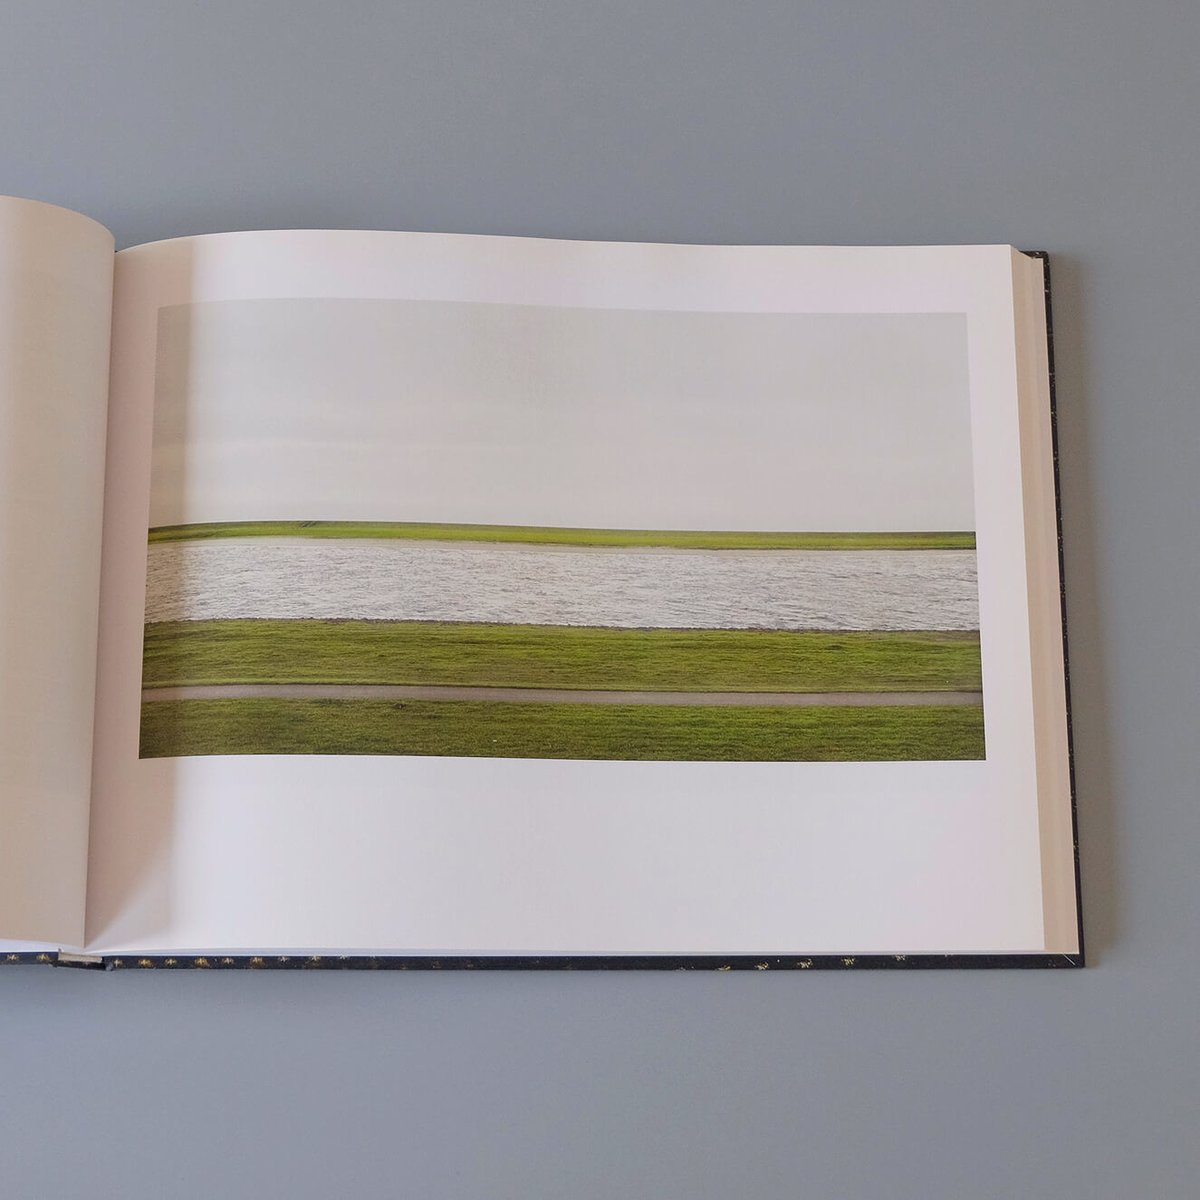 Andreas Gursky / アンドレアス・グルスキー展図録   Book Ernest